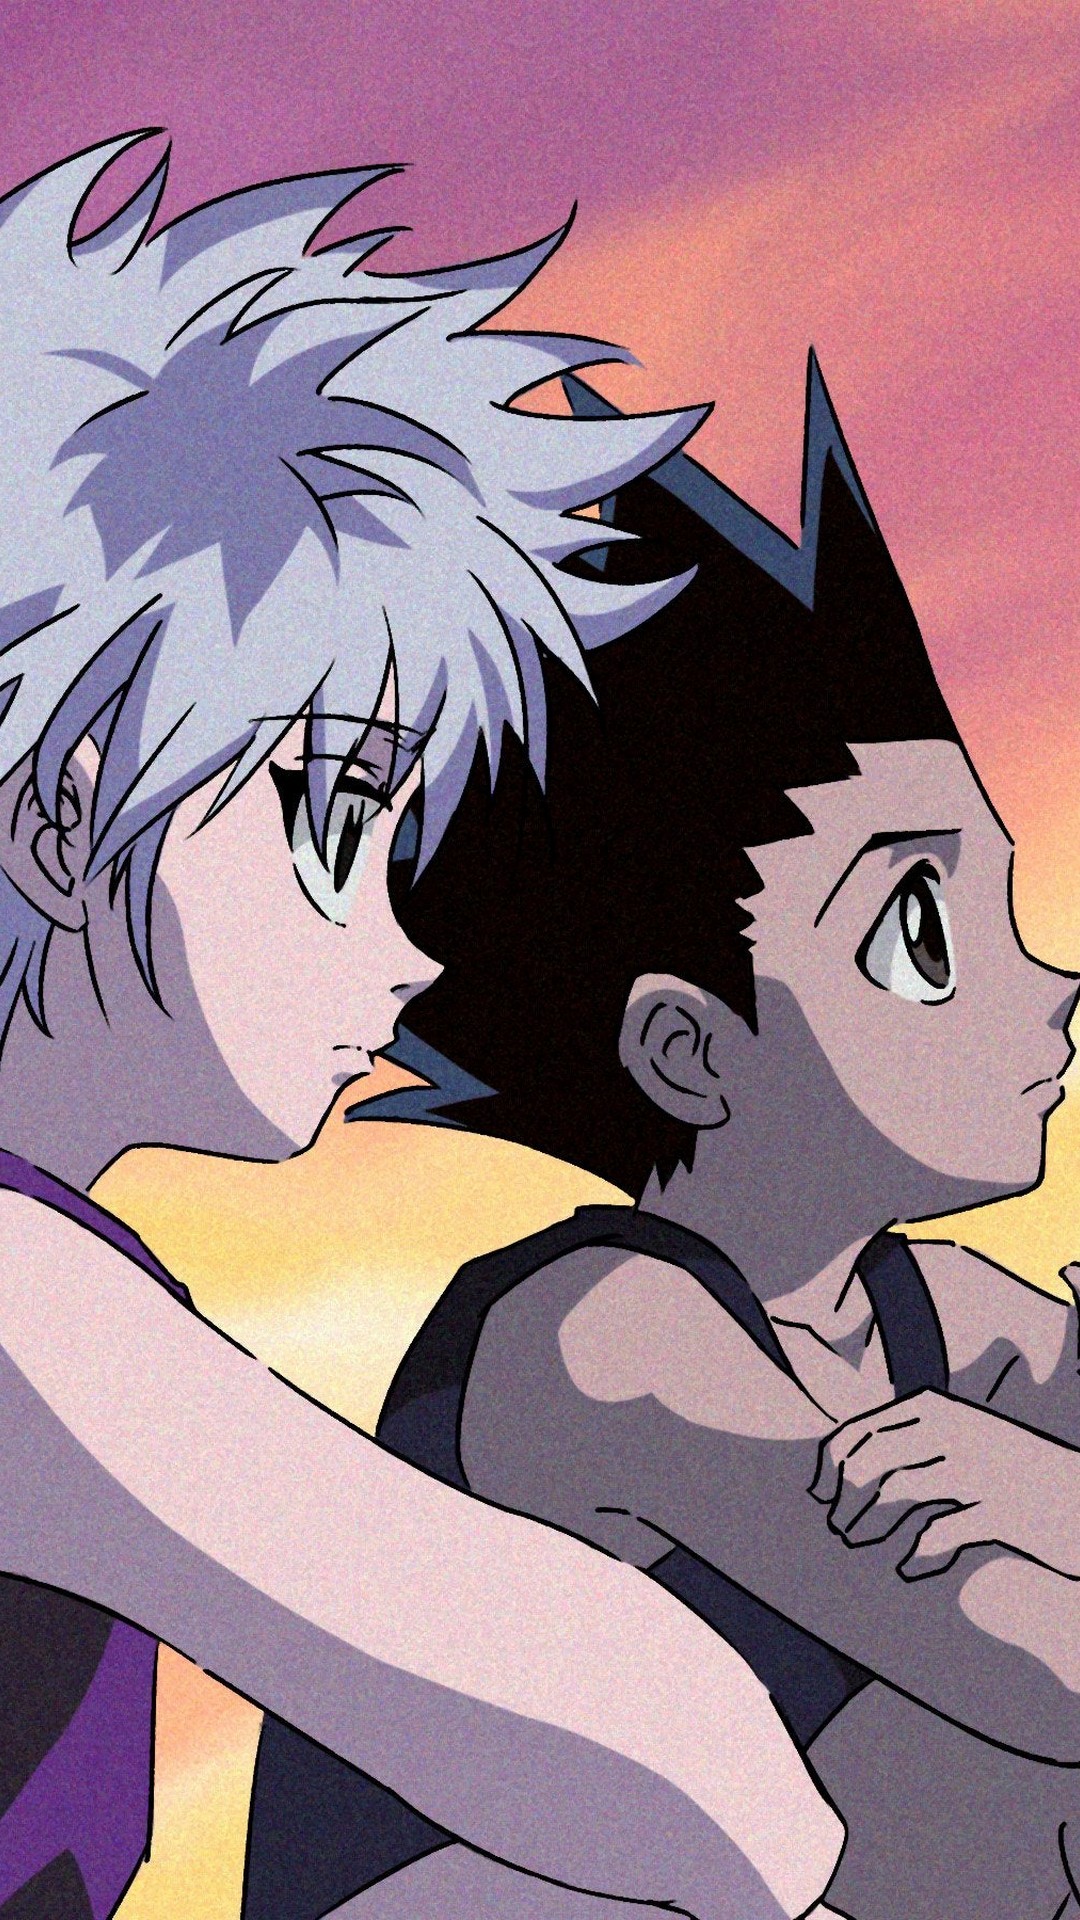 Gon And Killua iPhone X Wallpaper HD with high-resolution 1080x1920 pixel. Download all Mobile Wallpapers and Use them as wallpapers for your iPhone, Tablet, iPad, Android and other mobile devices